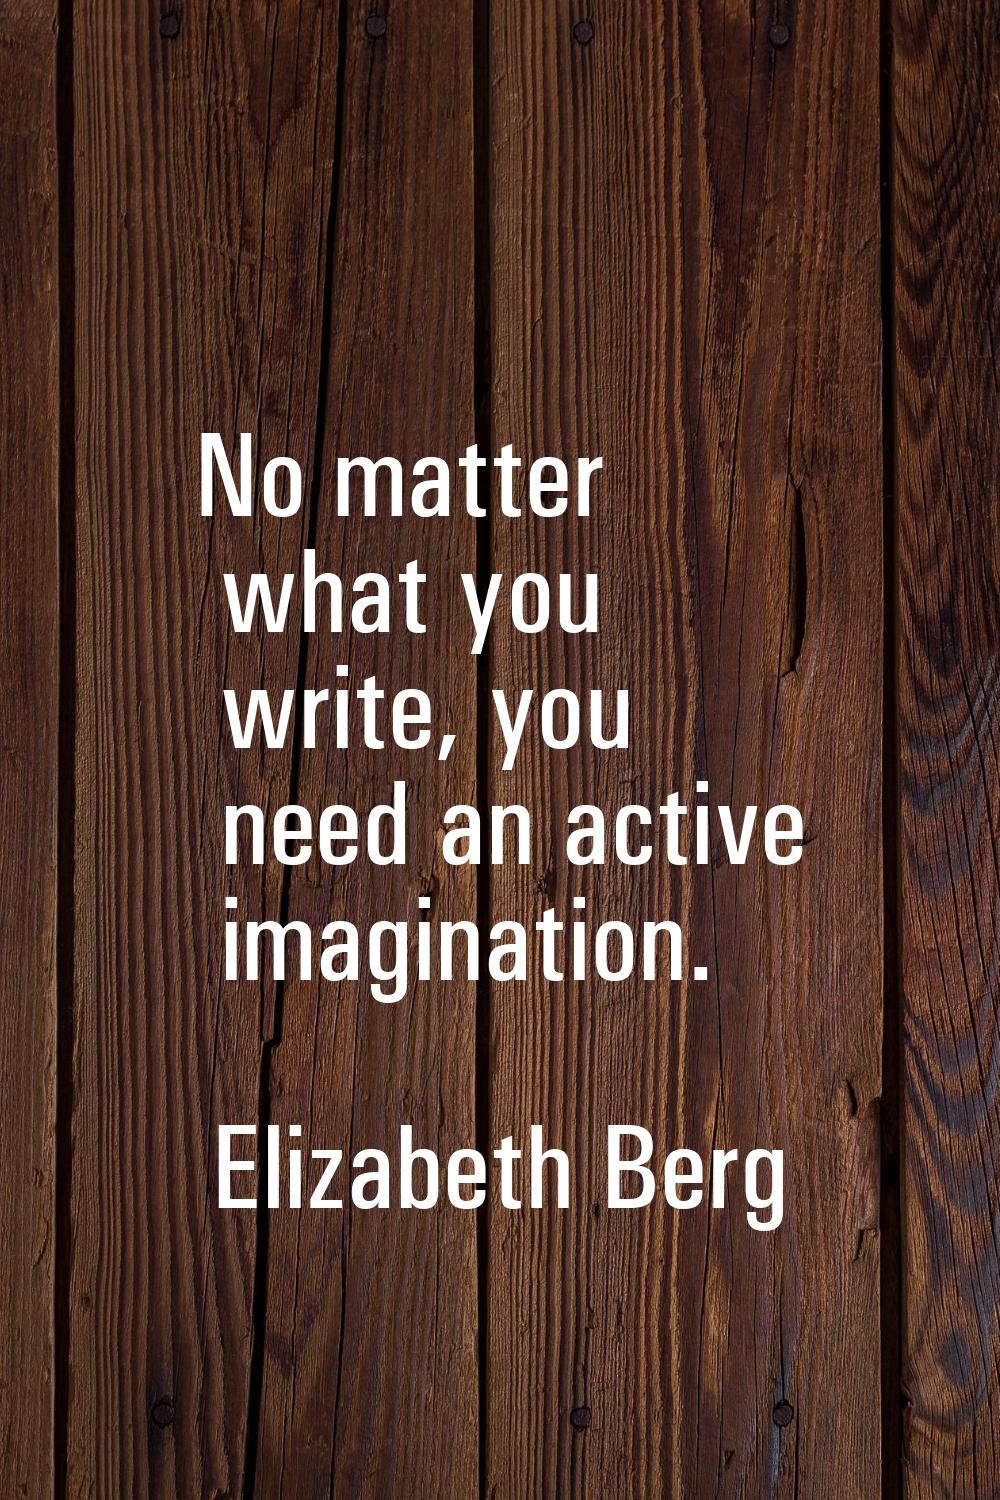 No matter what you write, you need an active imagination.